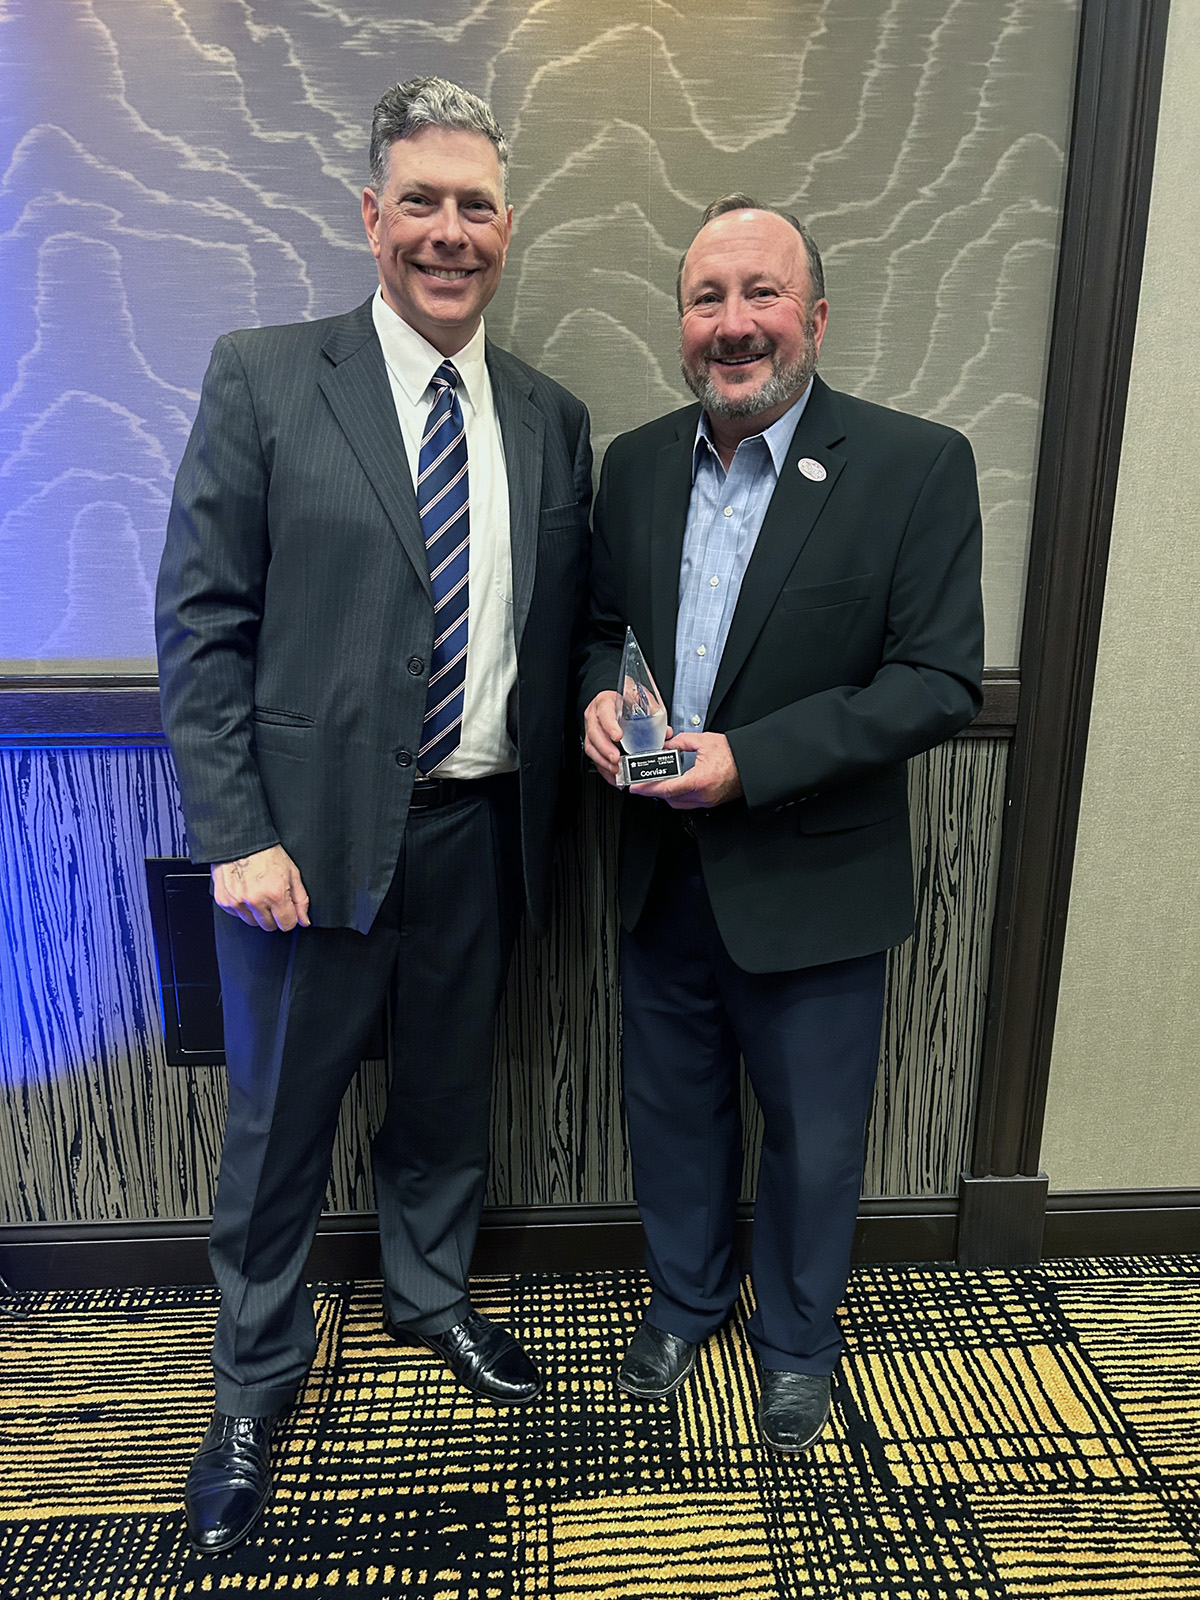 Bluepeak’s Randy Beutler (right) and Richard Emery hold the fiber internet provider’s Rising Star Award at Lawton Fort Sill’s 2023 Annual Banquet on Friday, June 9, 2023.